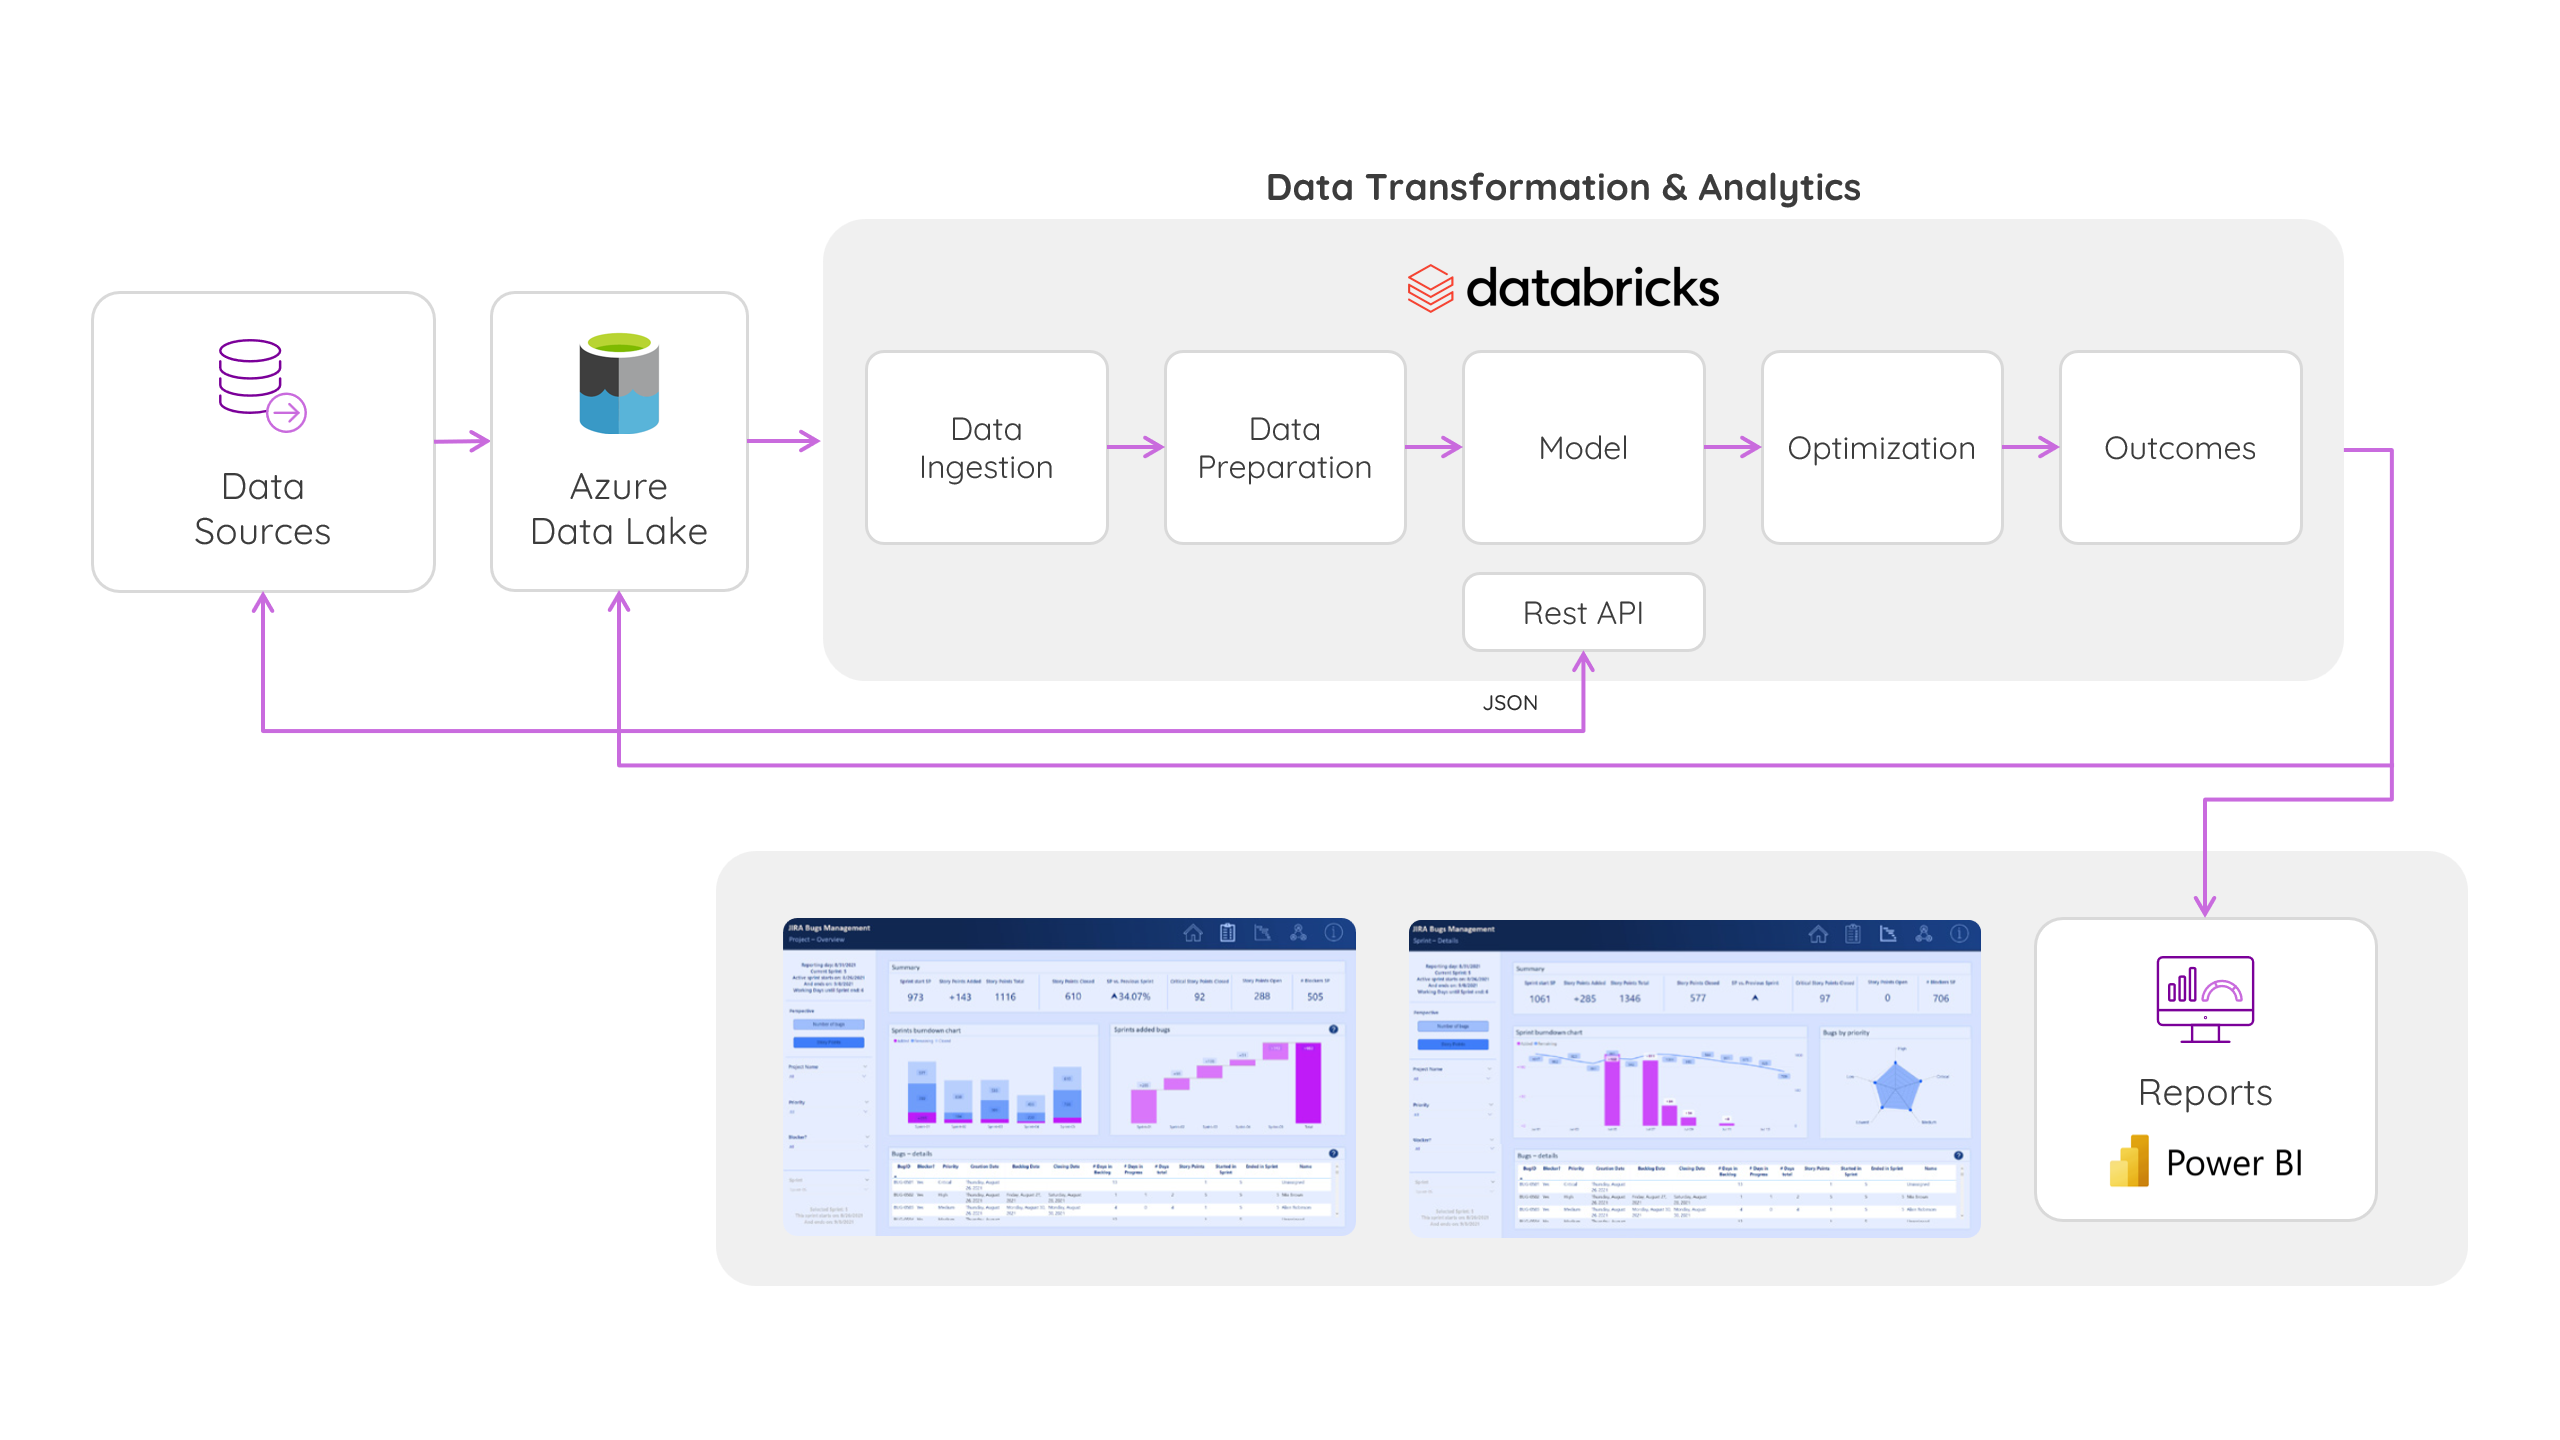 An illustration of an analytical model in a Microsoft Azure (Databricks) environment.